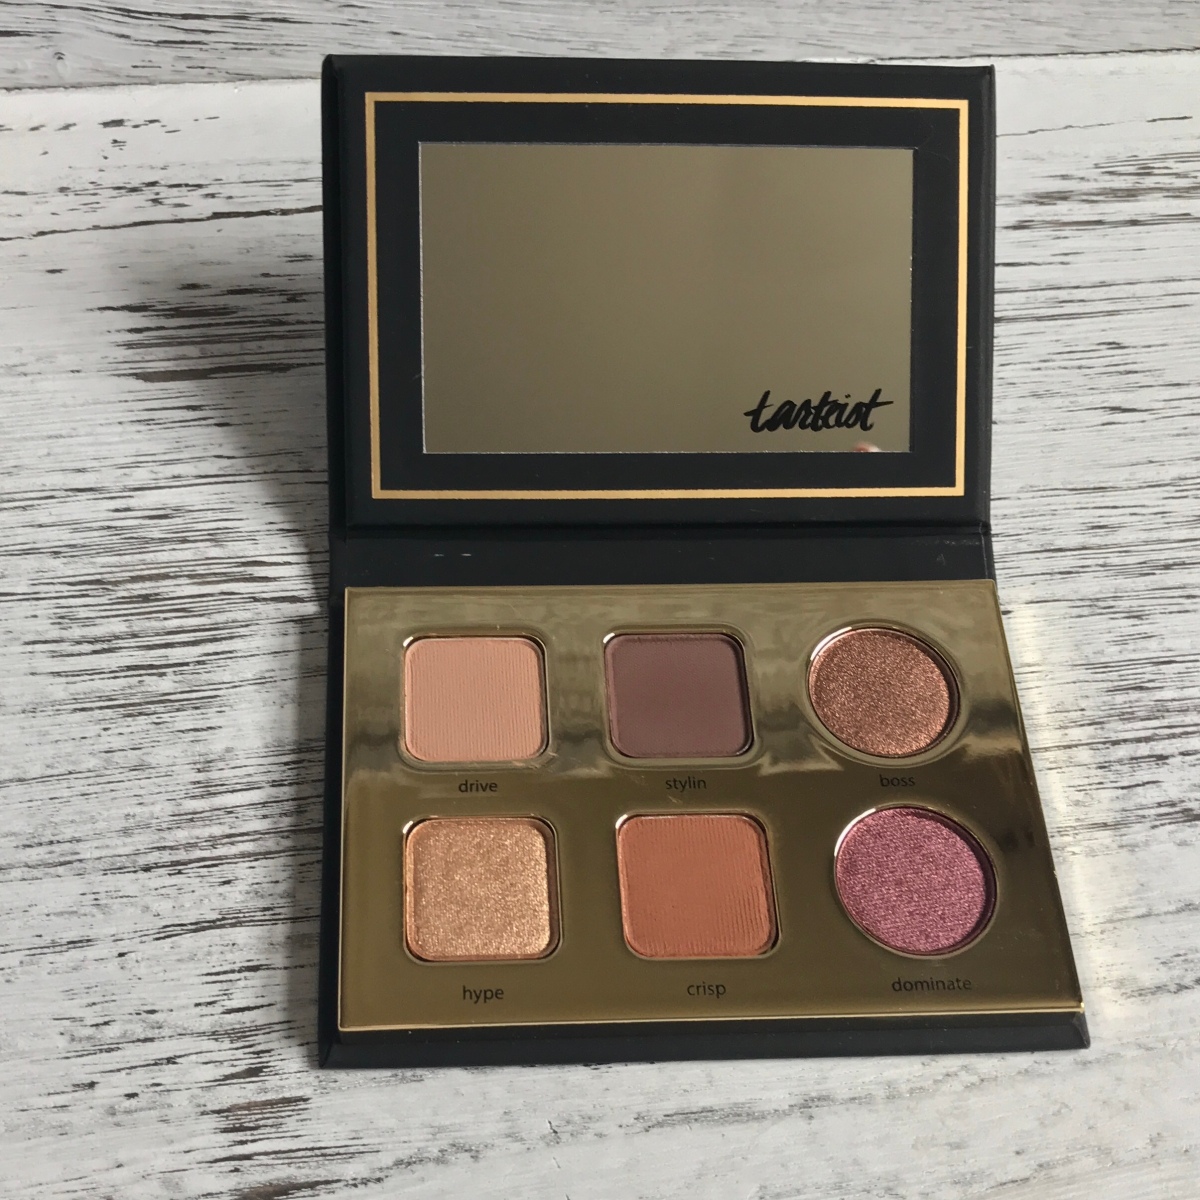 TARTE Tarteist PRO to go Amazonian Clay Palette UNBOXING- SALE $15 at Sephora NOW